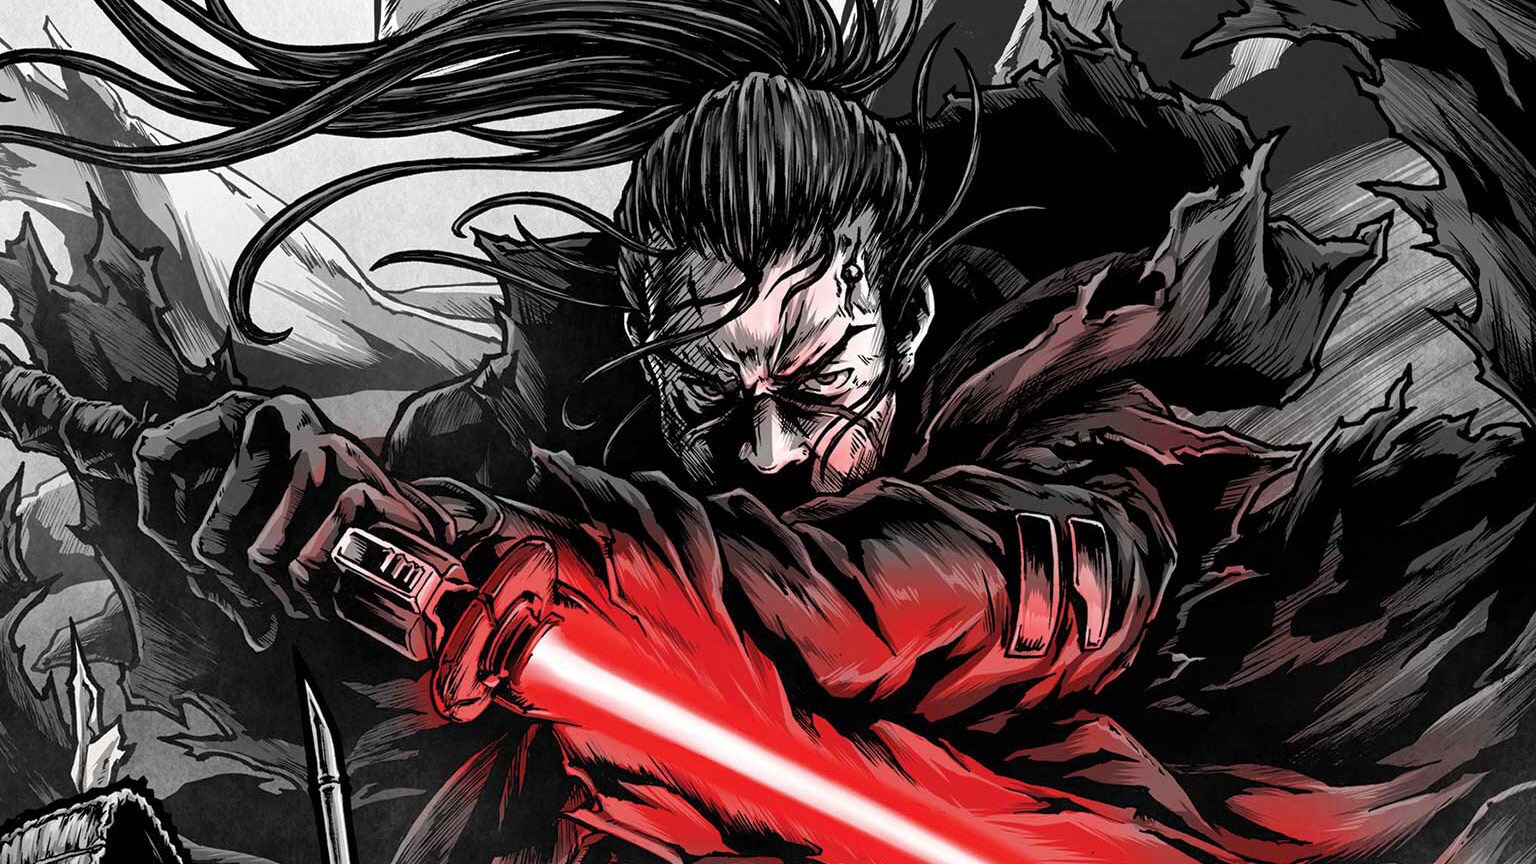 The Story of the Ronin Continues and More from Marvel’s September 2022 Star Wars Comics - Exclusive Preview